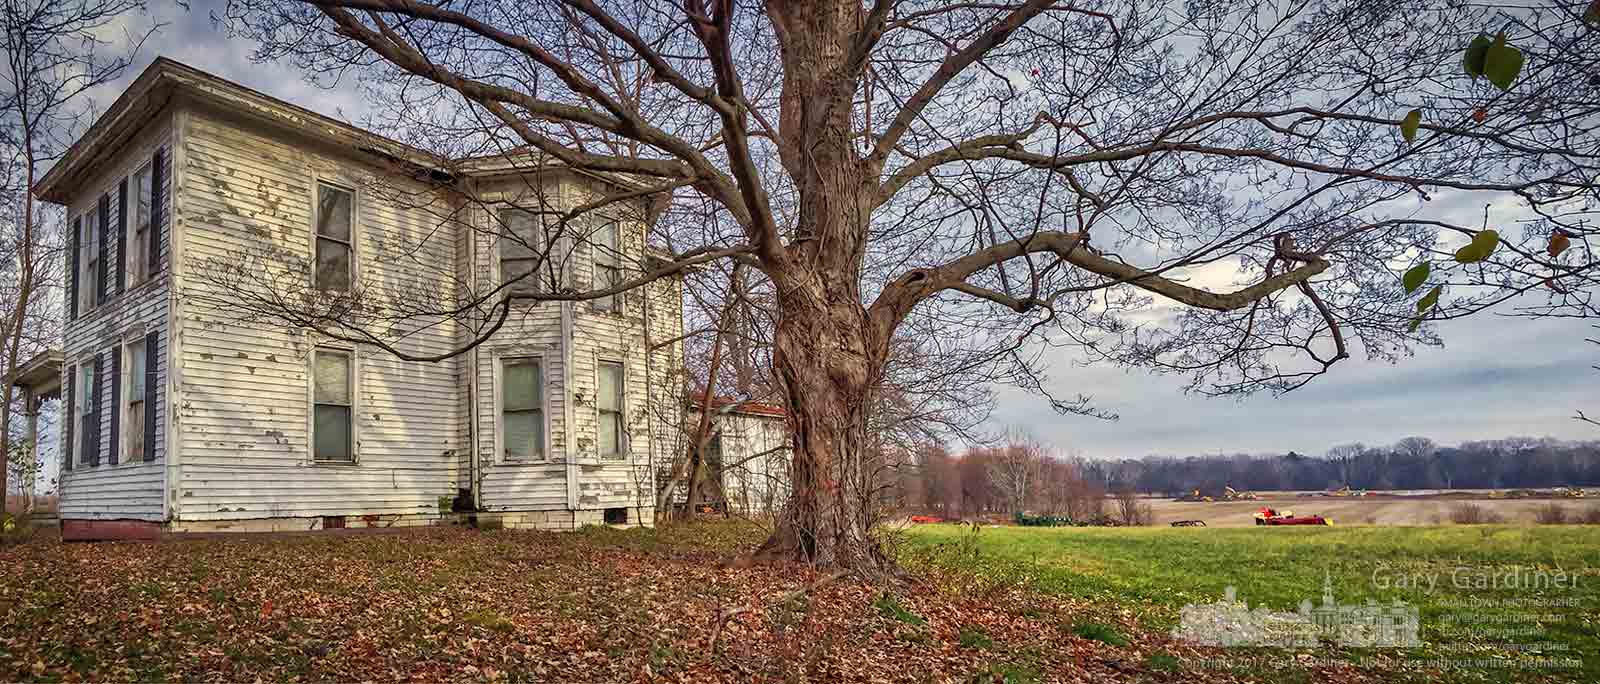 The old farmhouse on the Braun Farm sits beside a maple tree along Cleveland Ave. with a senior housing project being built on the opposite end of the property along Cooper Road. My Final Photo for Dec. 11, 2017.